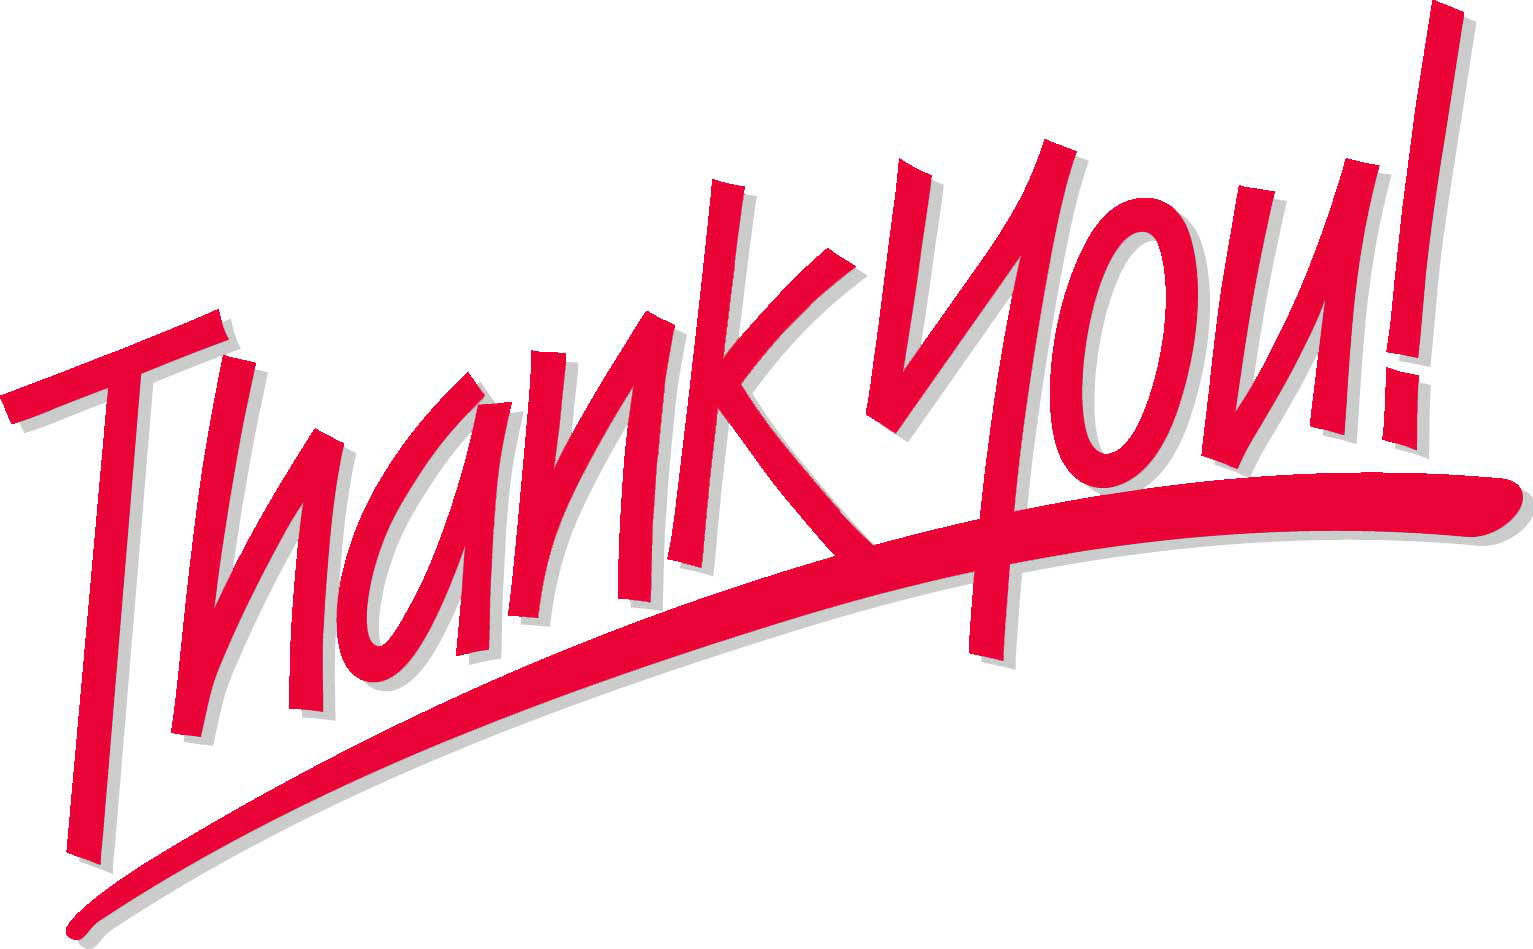 Thank You Png Images Free Thank You Clipart Pictures Free